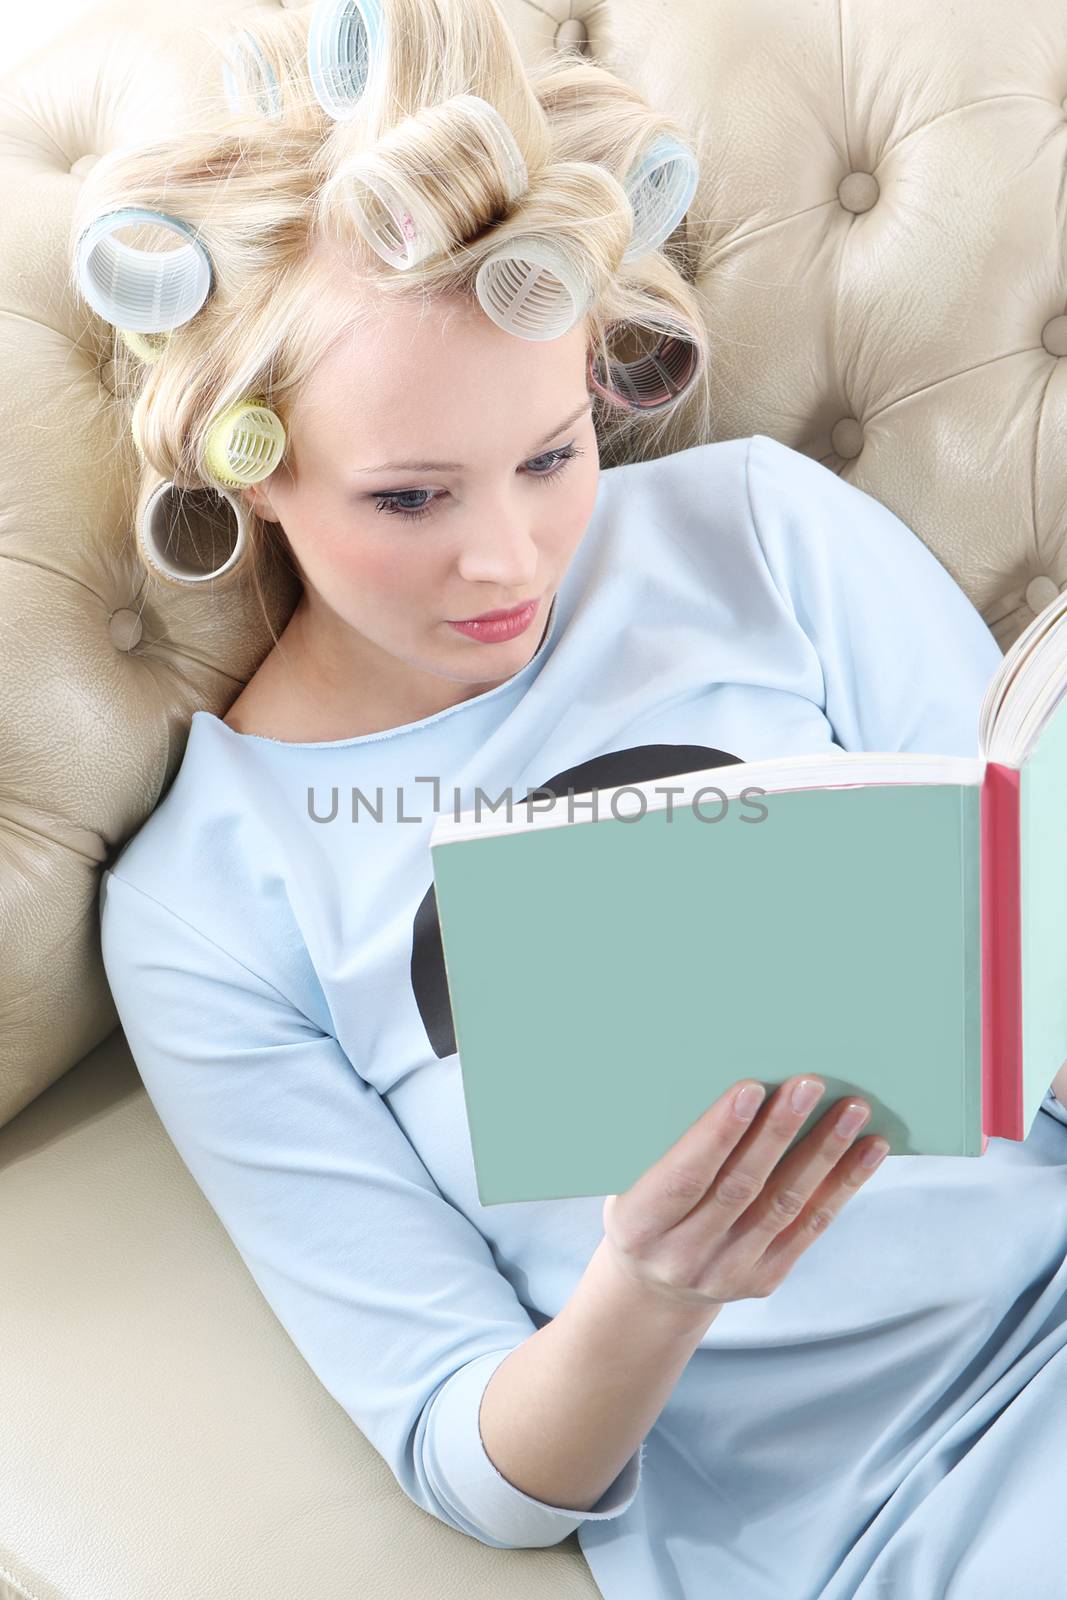 Young woman with hair rollers screwed reading a book while relaxing on the sofa